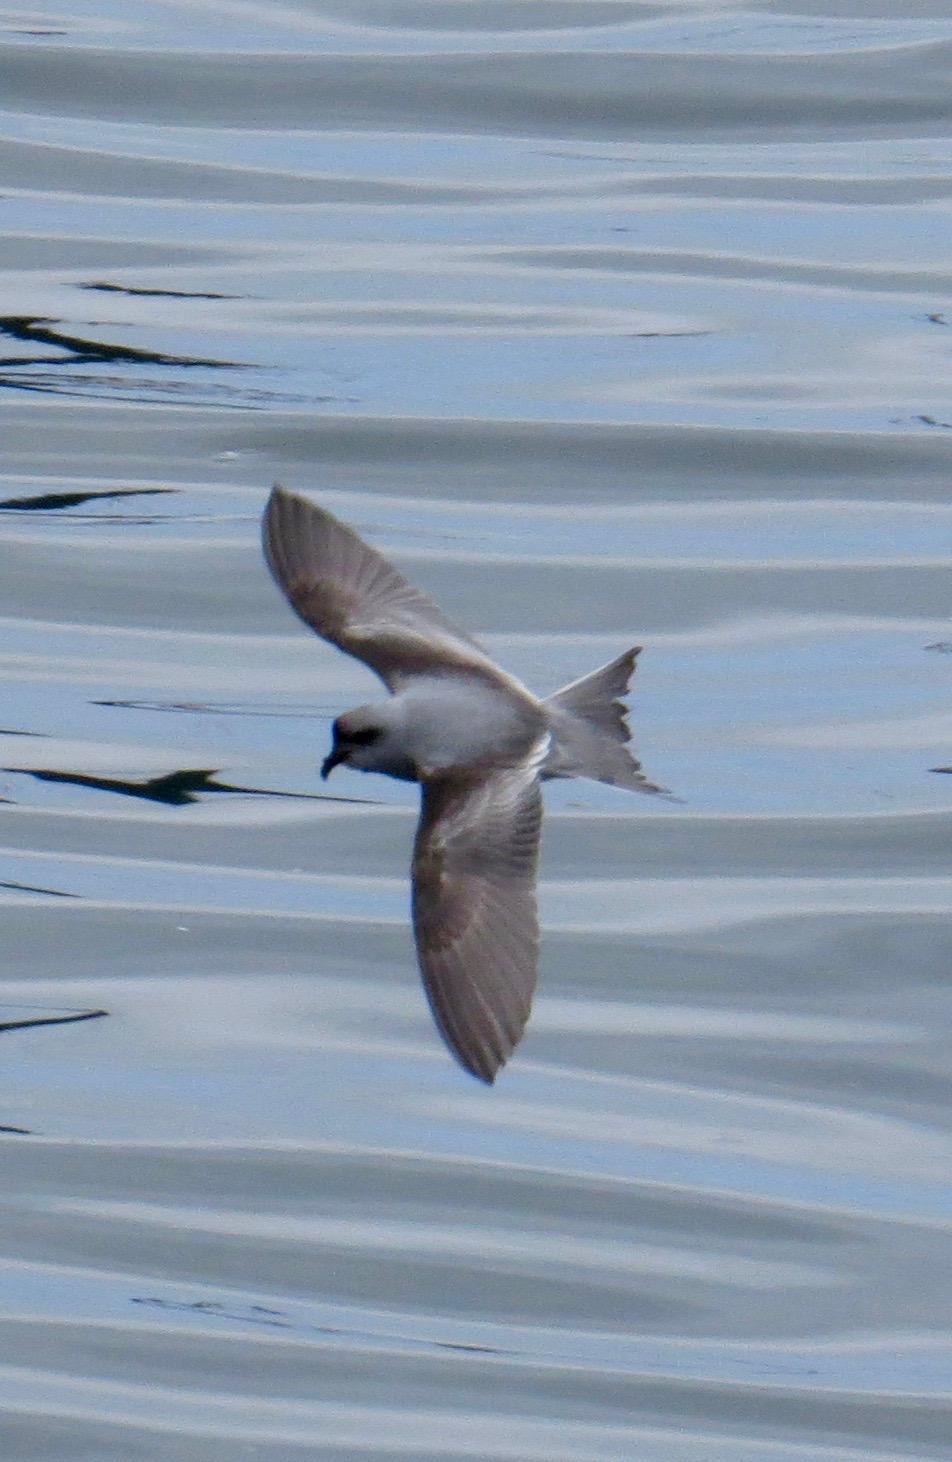 Fork-tailed Storm-Petrel Photo by Don Glasco